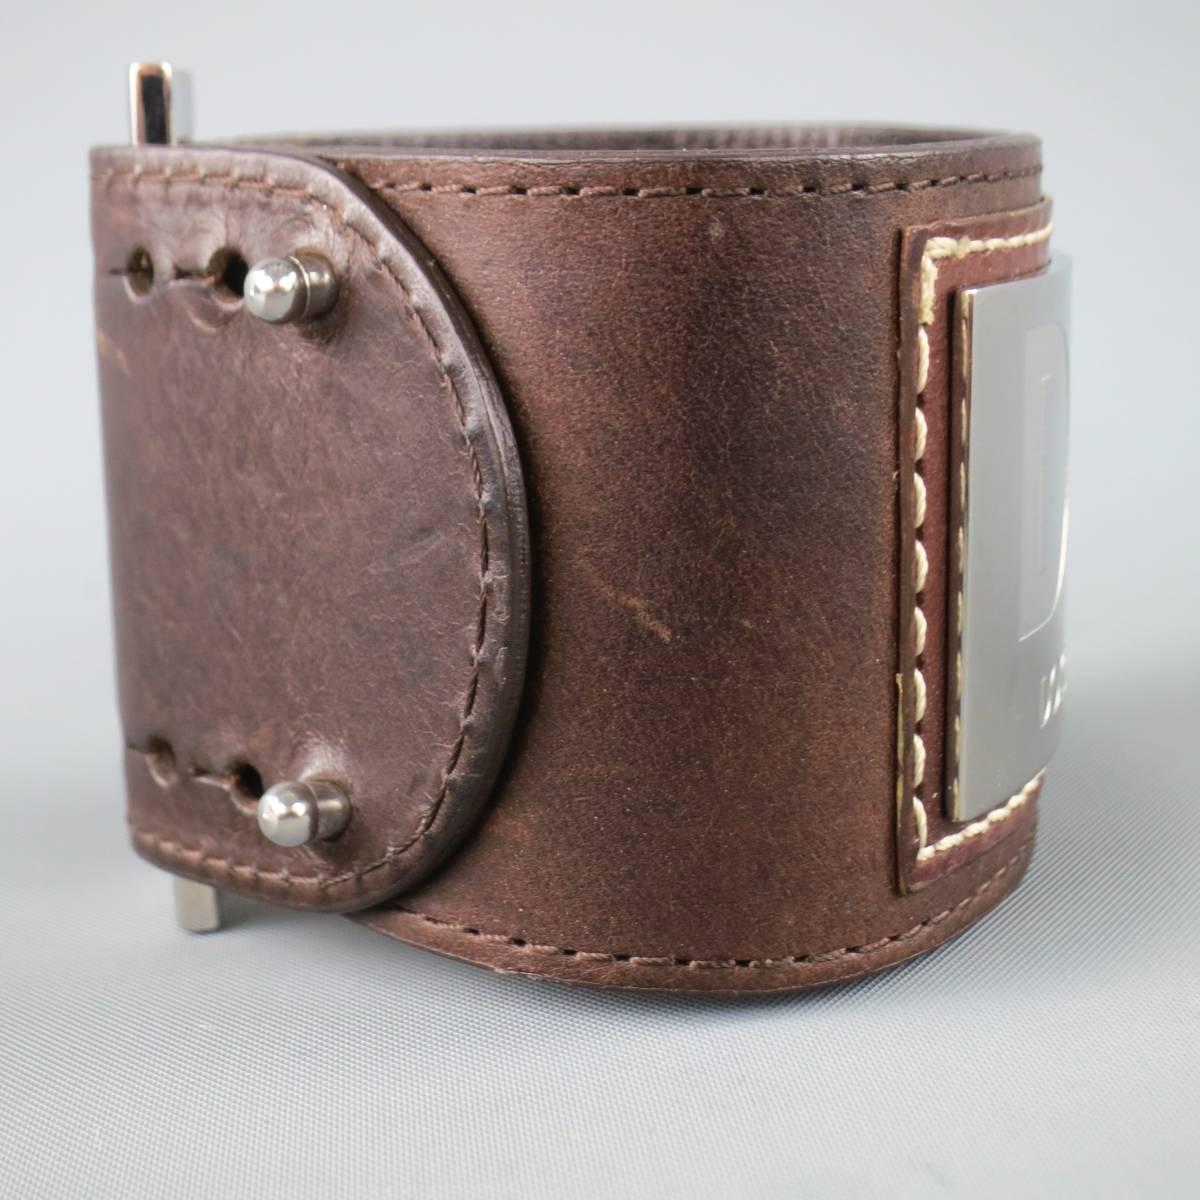 D&G by Dolce & Gabbana cuff comes in a rich chocolate brown leather and features an oversized silver tone logo plaque and adjustable button stud closure. Wear throughout. Made in Italy.
 
Good Pre-Owned Condition.
 
Length: 8 in.
Width: 1.75